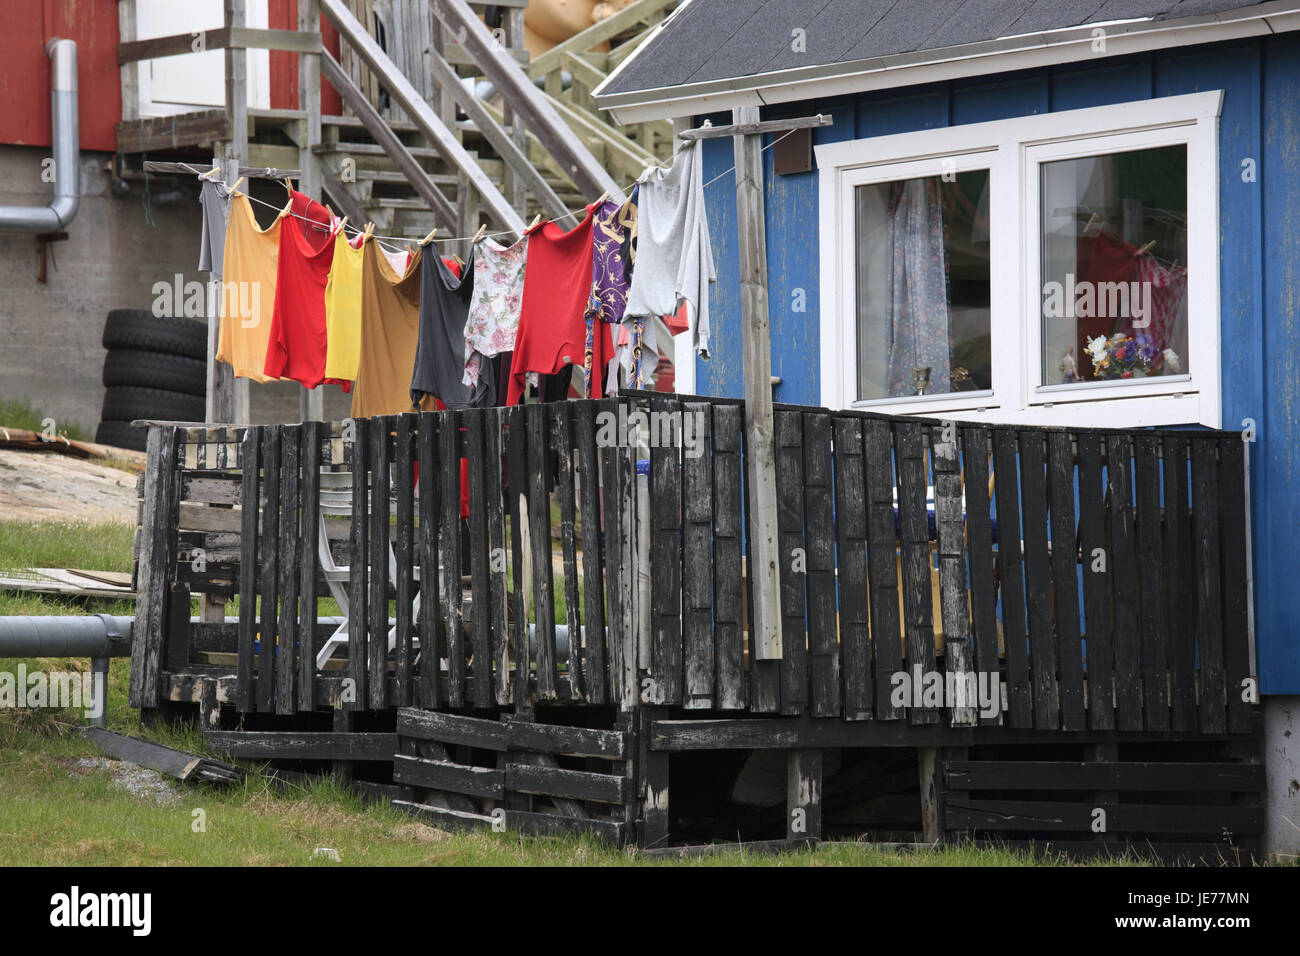 Greenland, Sisimiut, residential house, detail, veranda, clothesline, Western Greenland, town, destination, building, architecture, houses, timber houses, timber-frame construction way, deserted, laundry, washday, clothes, hang, dry, suspended, Stock Photo